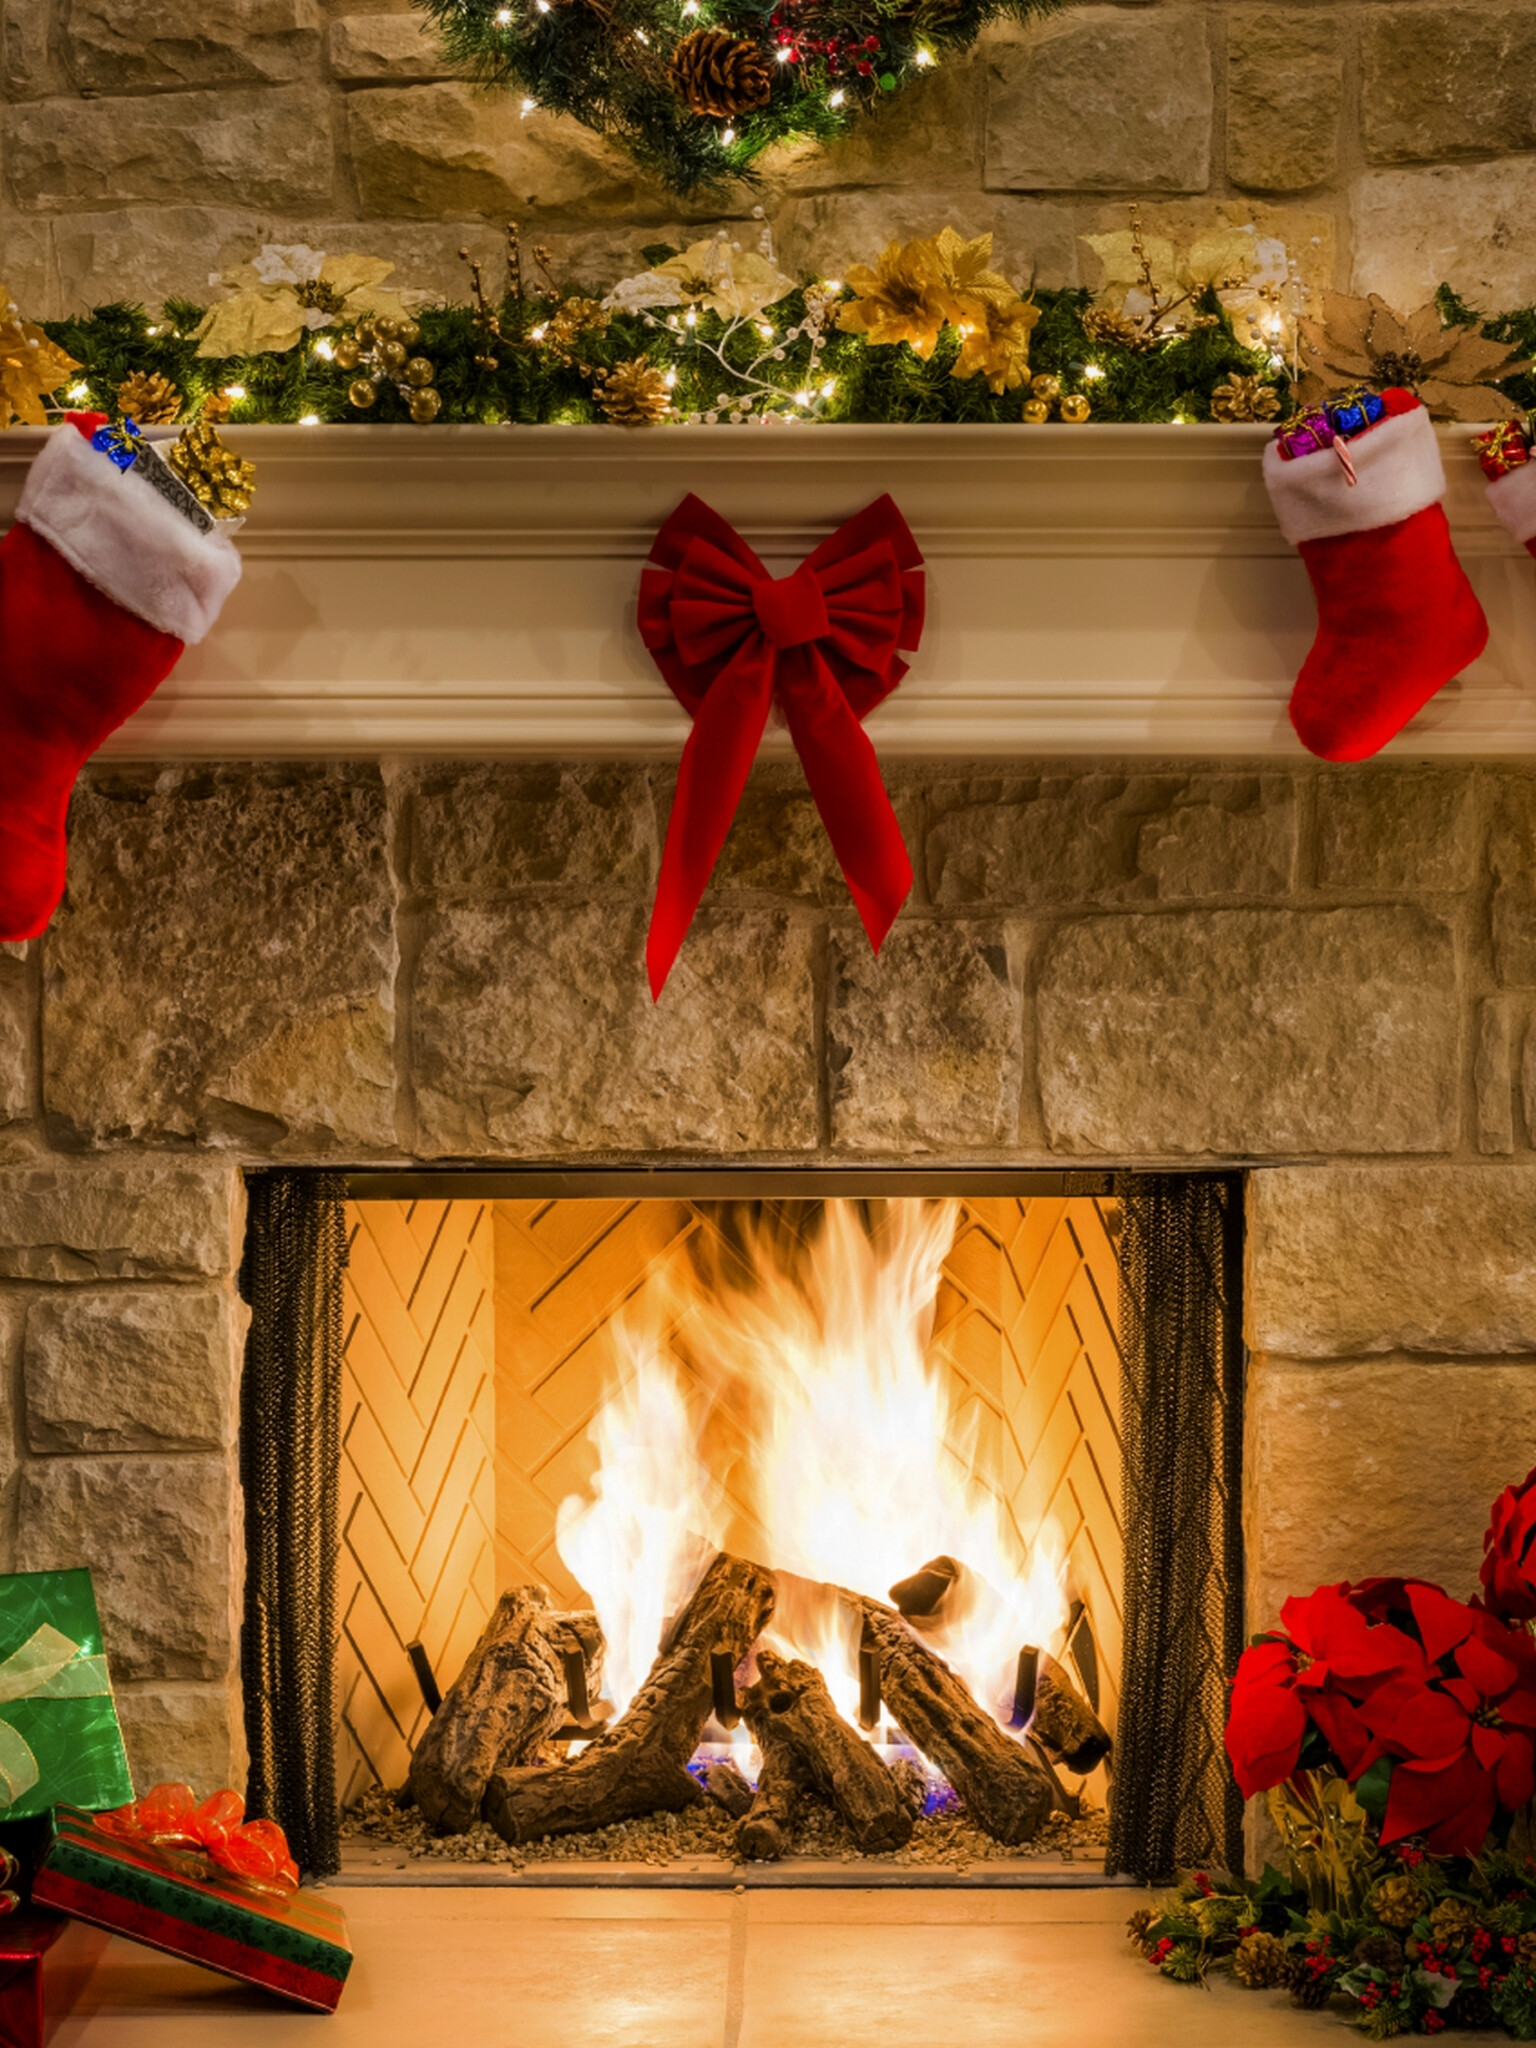 Christmas Fireplace: Hearth, Flame, Wood, Holiday decorations. 1540x2050 HD Background.